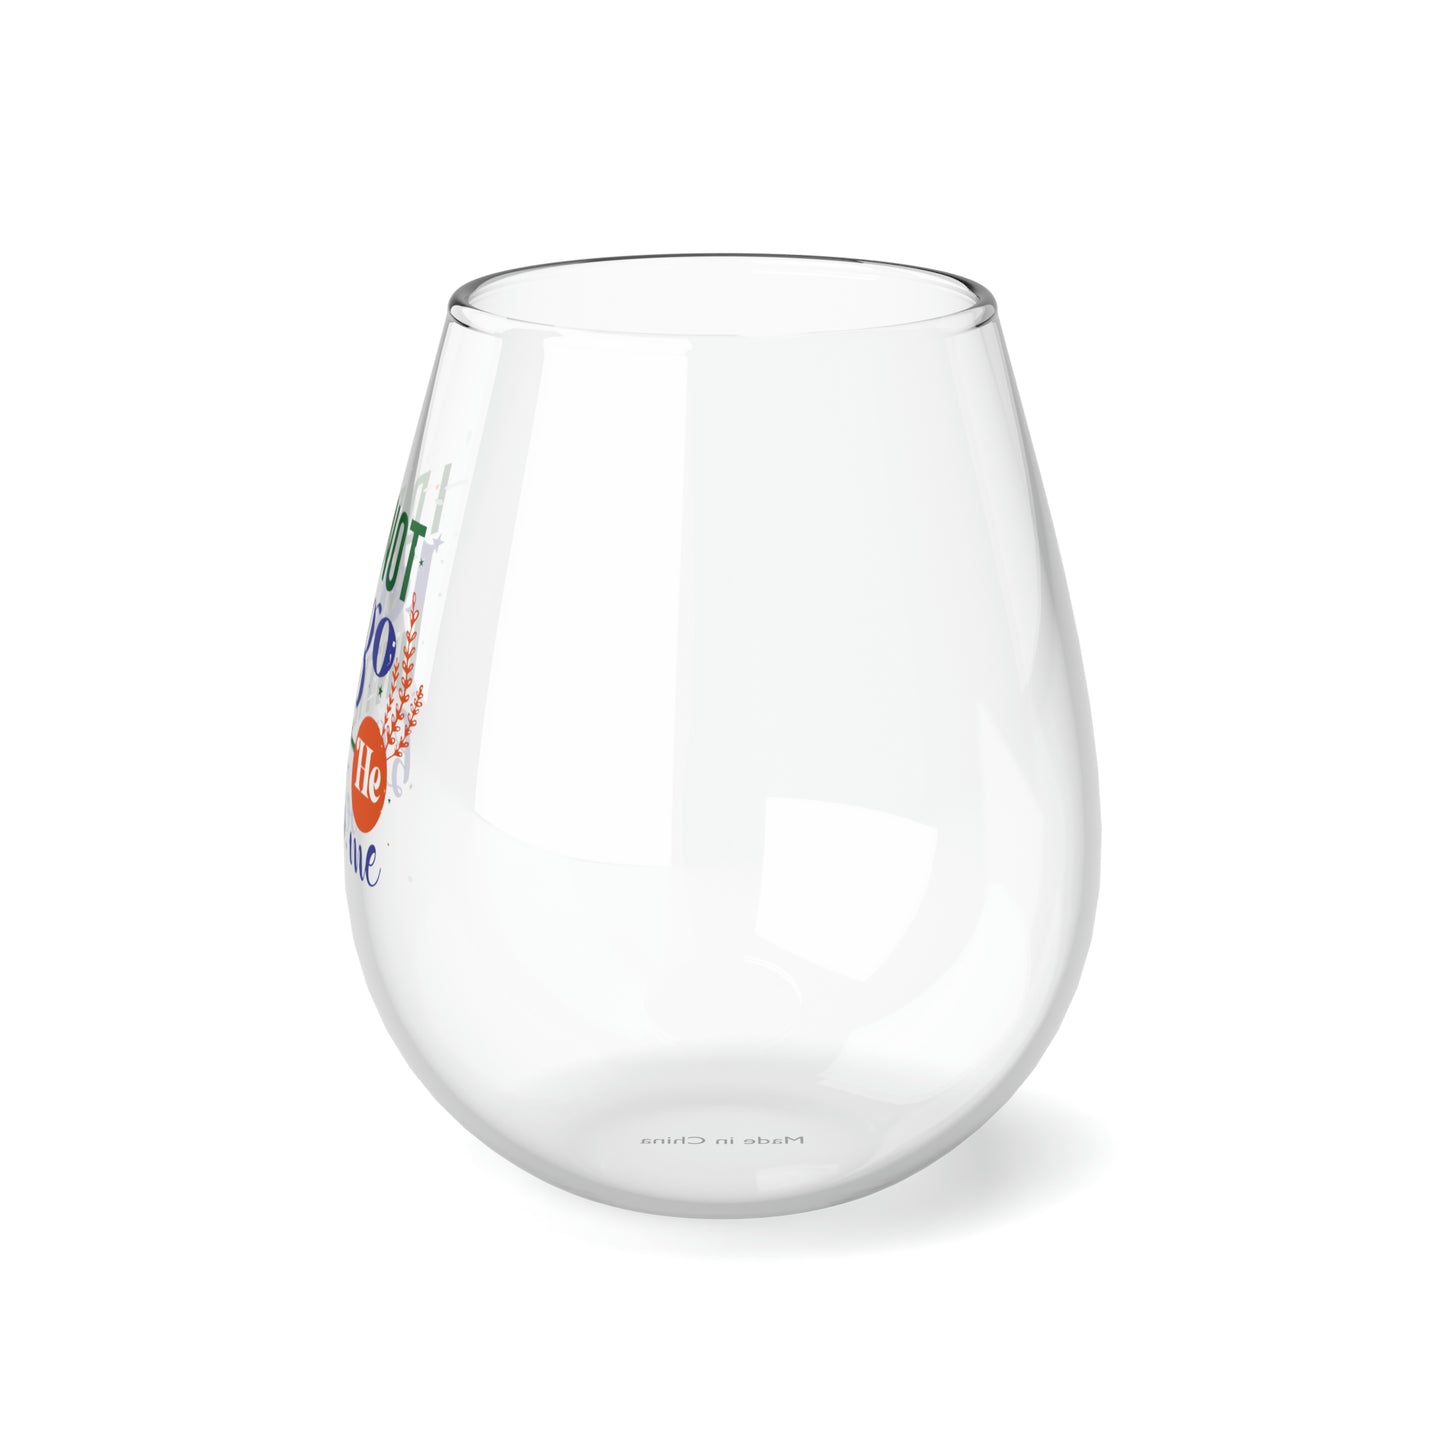 I Did Not Let Go Until He Blessed Me Stemless Wine Glass, 11.75oz